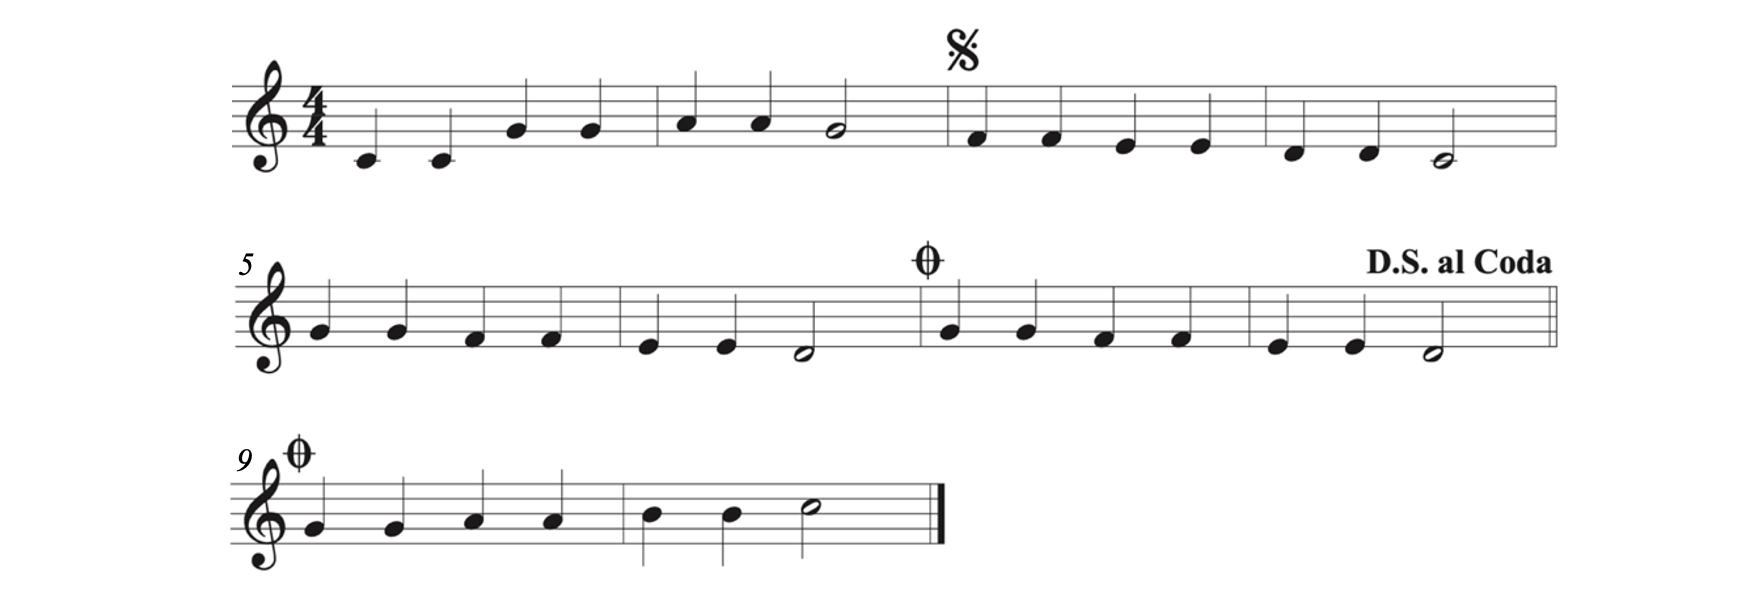 Twinkle Twinkle Little Star with D.S. al Coda at the end of measure 8. The sey-nyo symbol is at the start of measure 3. The first coda symbol is at the end of measure 6. The second coda symbol is at the start of measure 9.